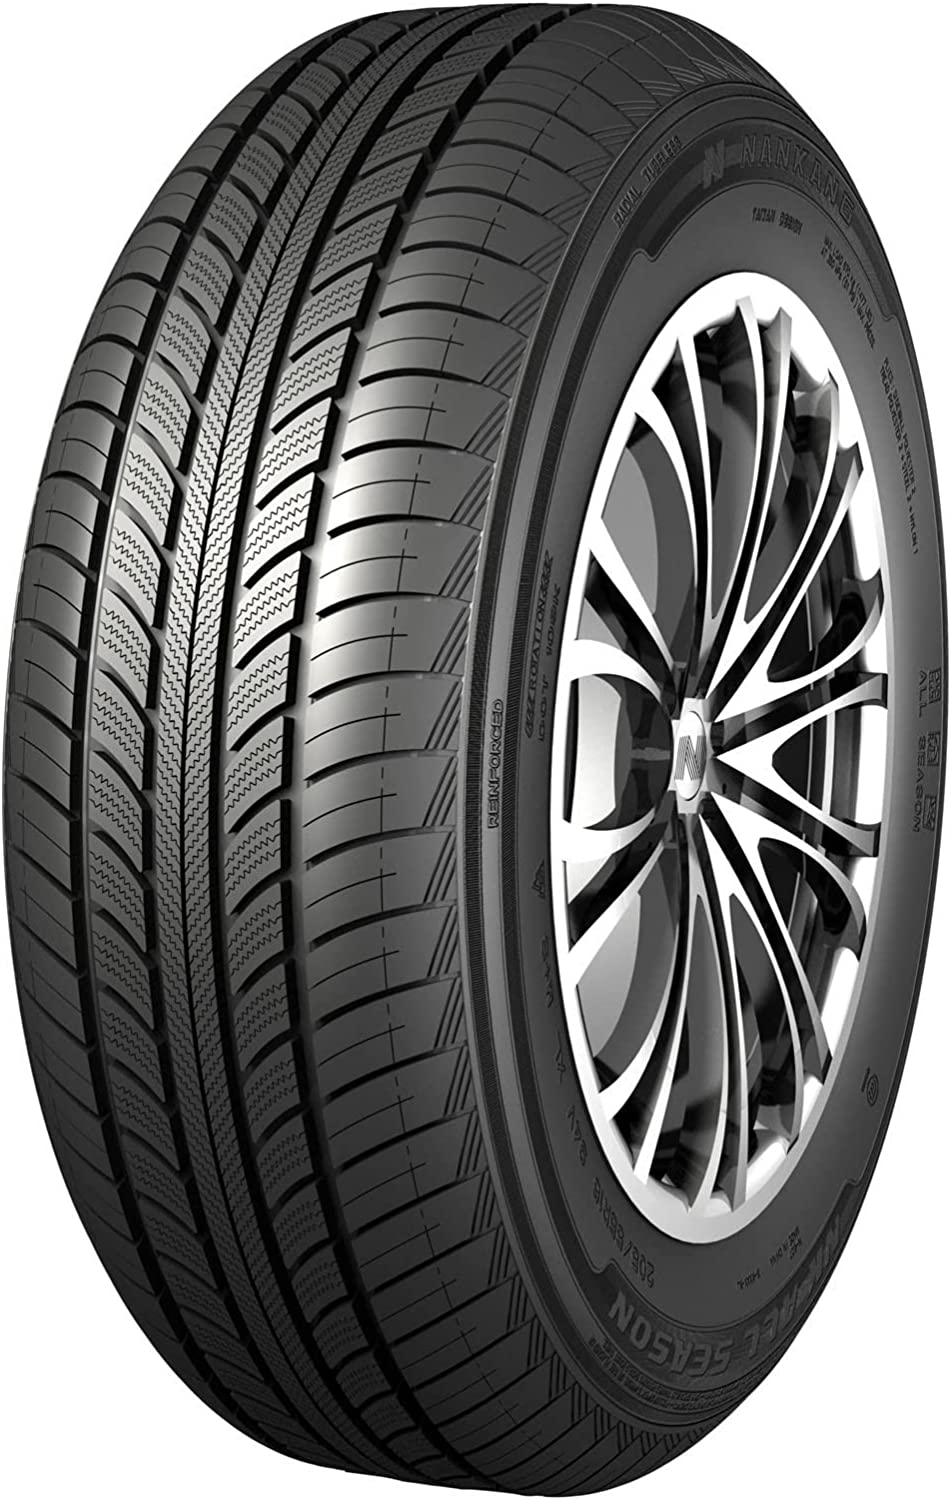 Gomme Nuove Nankang 185/70 R14 88T N-607+ M+S pneumatici nuovi All Season